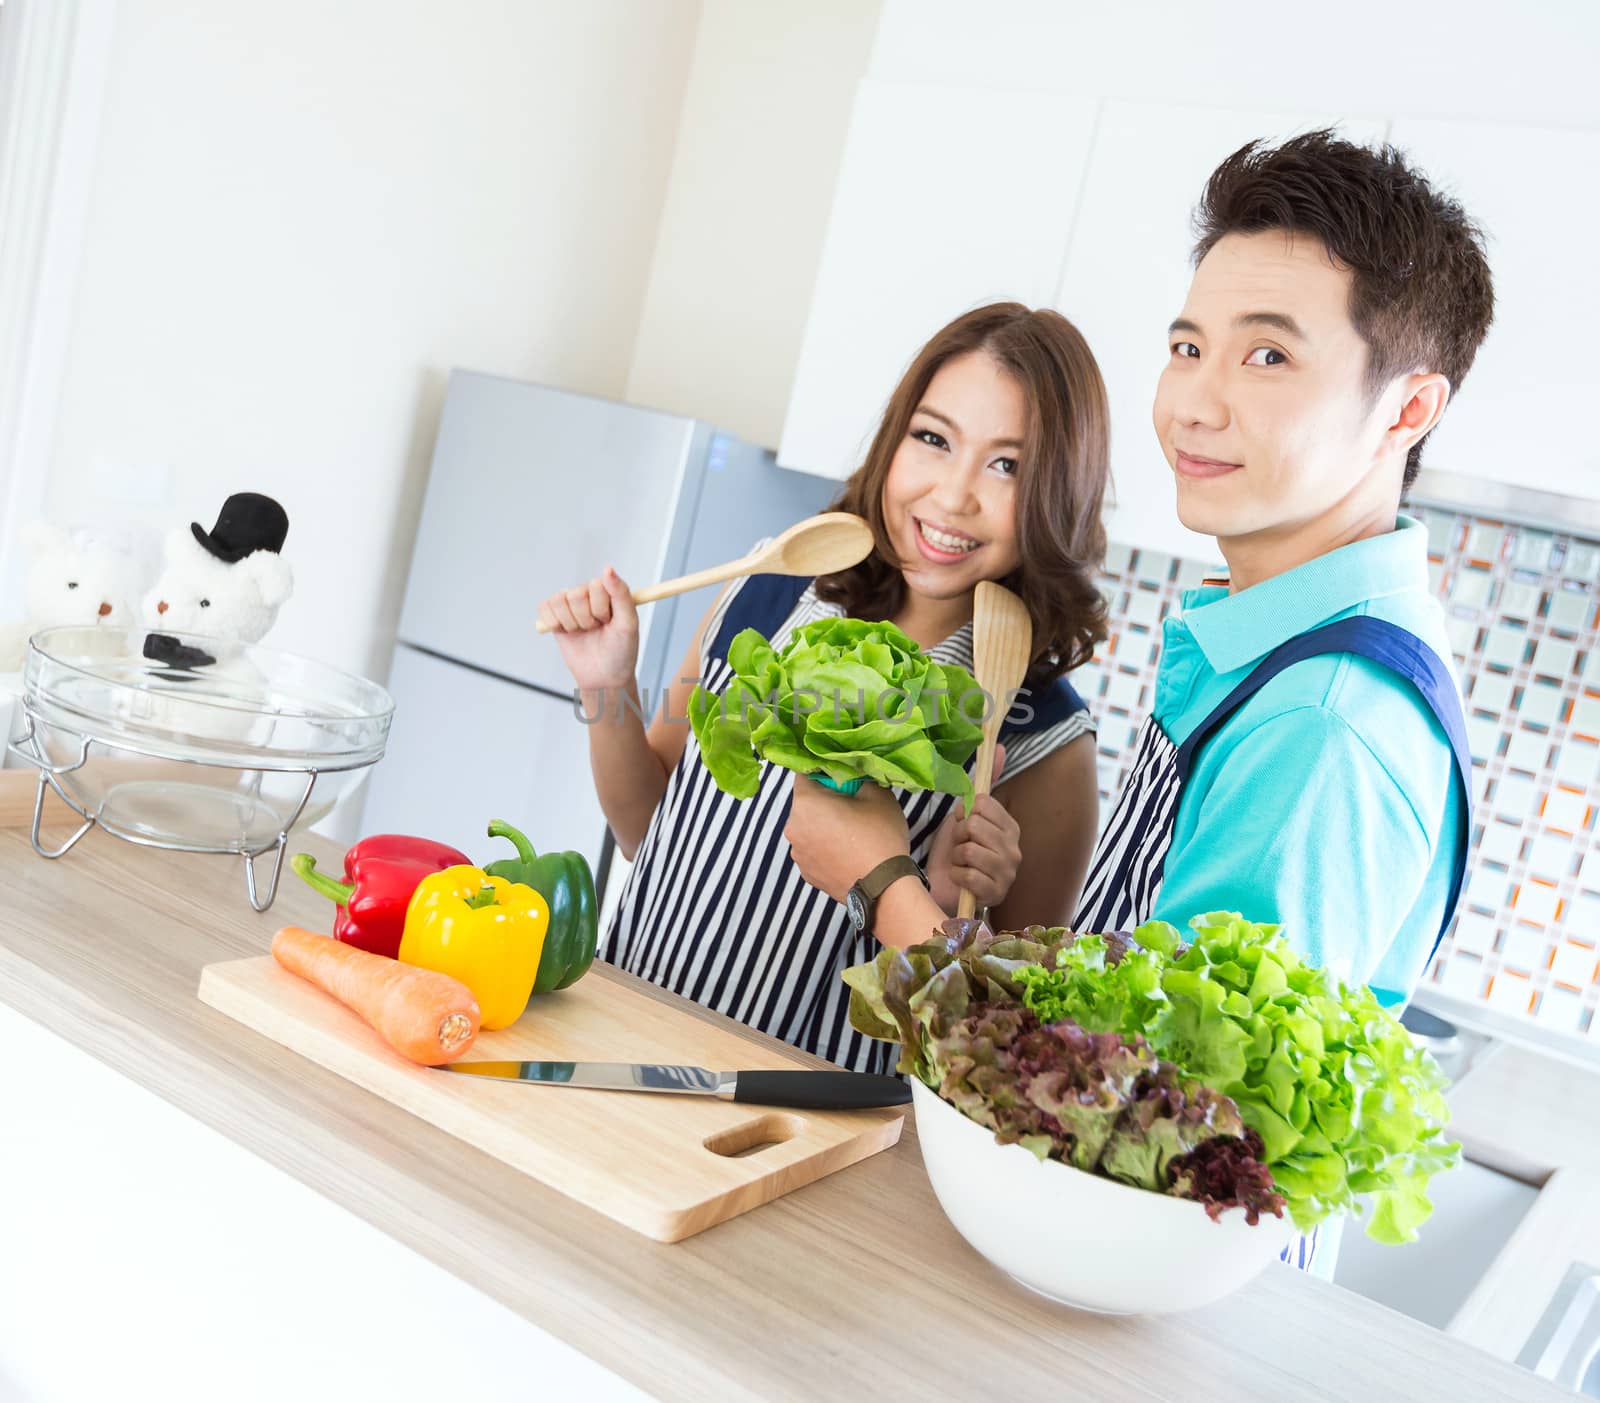 Young happy couples in domestic kitchen